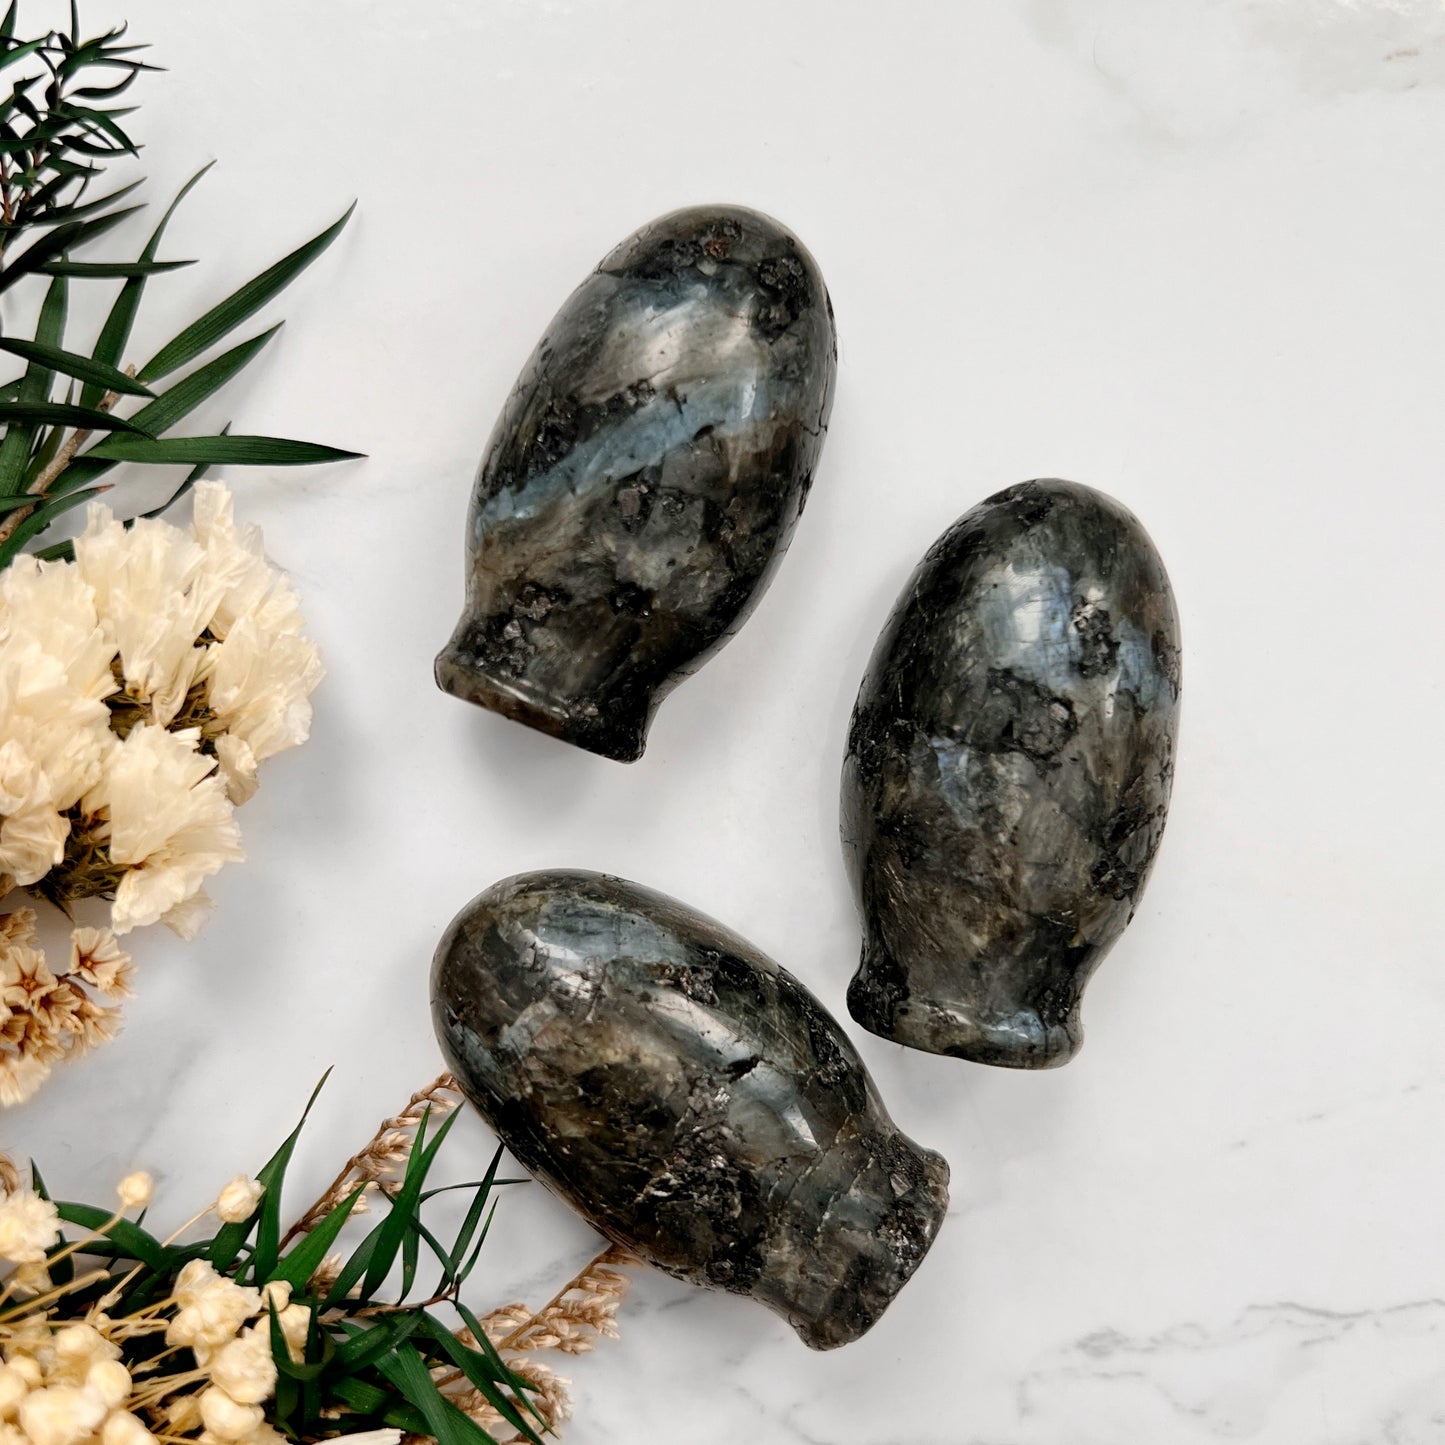 Revealing the Hidden Beauty of Larvikite: A captivating image revealing the backside of three Larvikite crystal vulva shapes, showcasing the stunning blue flash that dances across their surface.